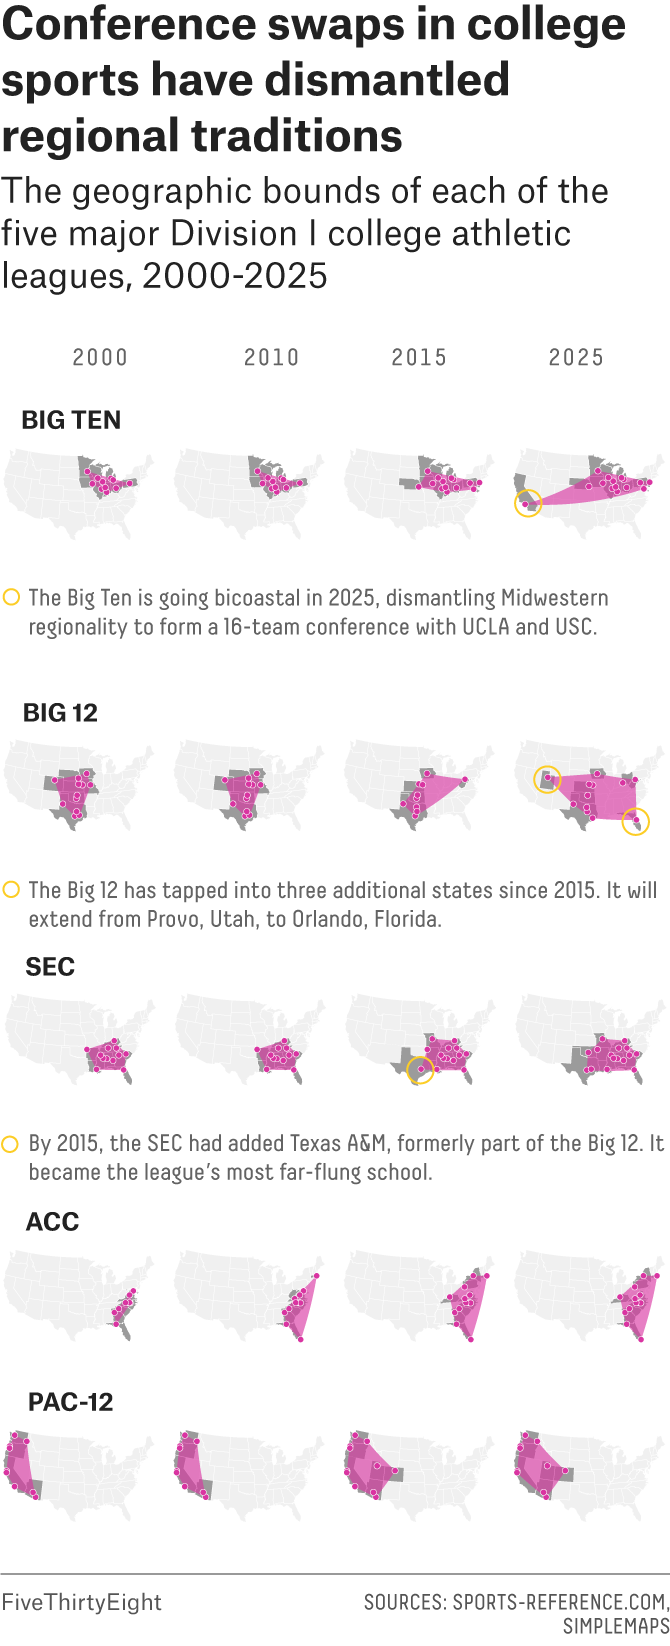 A grid of 20 maps show how the Big Ten, Big 12, SEC, ACC and PAC-12 have shifted geographically from 2000 to 2025. In the case of the Big 10, by 2025 it will span the entire U.S. with the additions of UCLA and USC. 